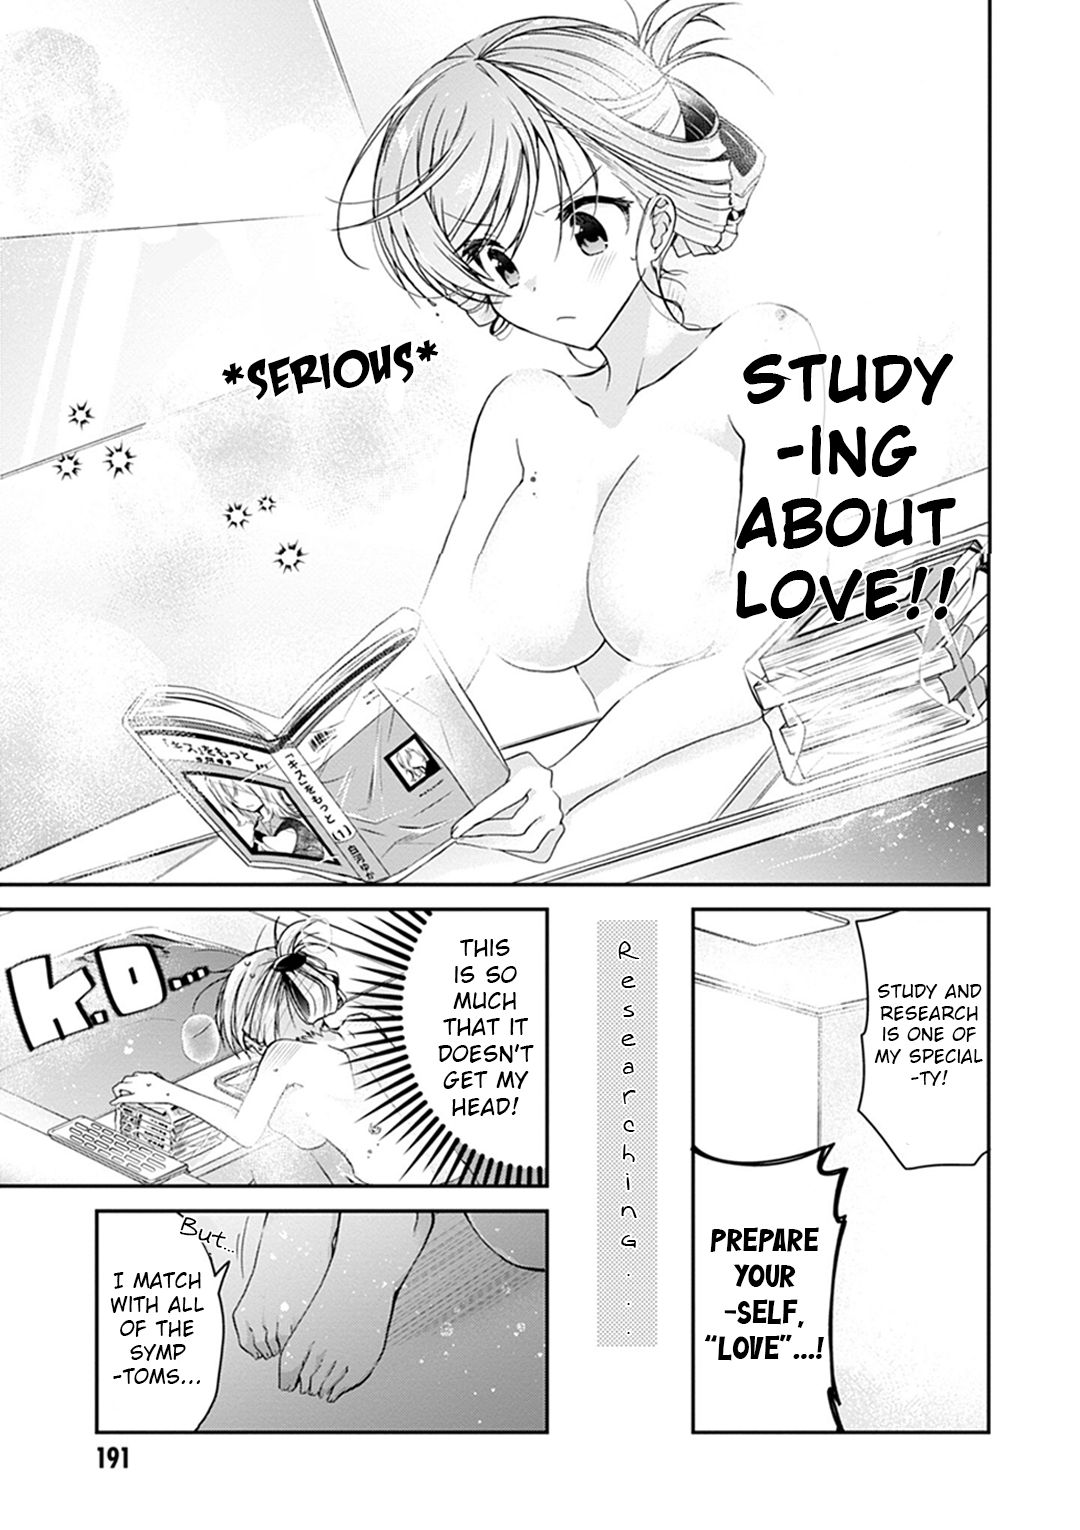 Isshiki-san Wants to Know About Love. - chapter 5.5 - #4